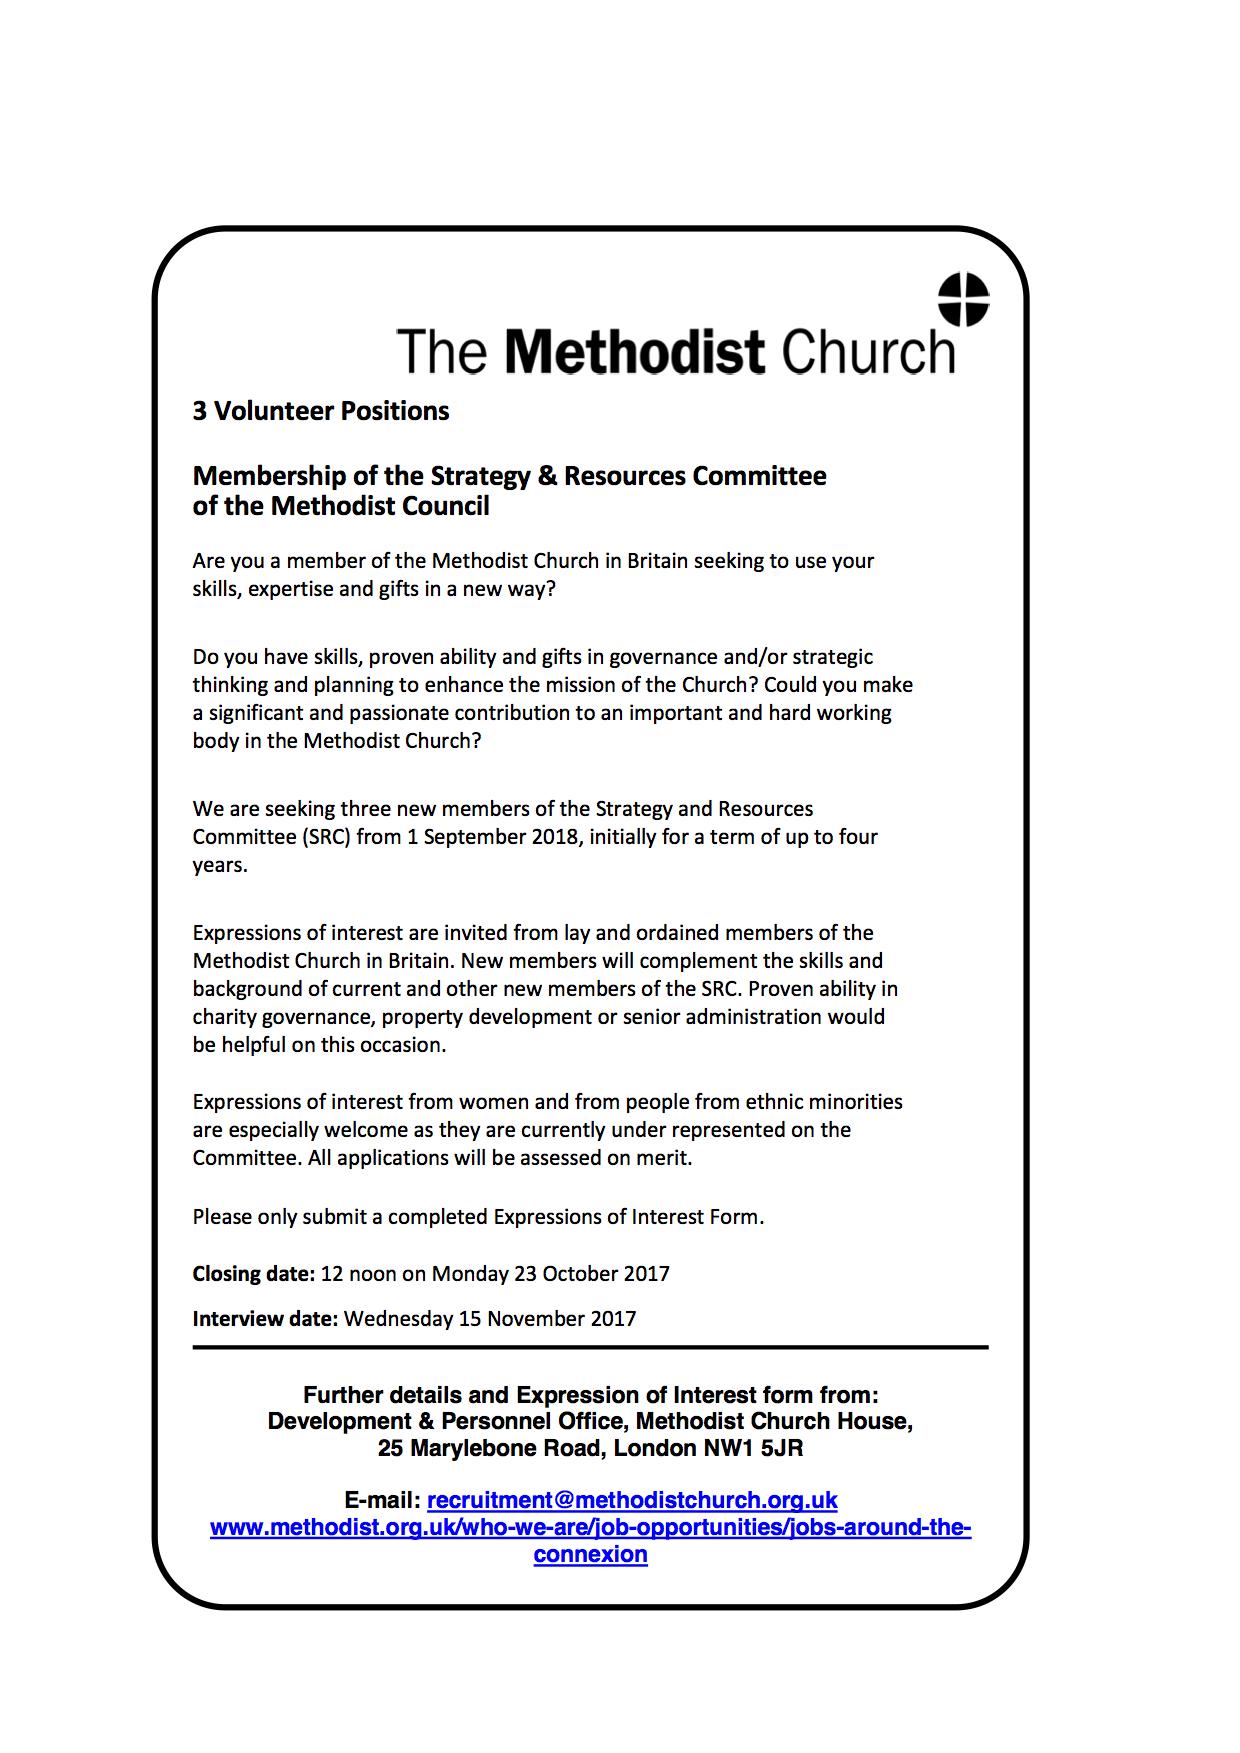 3 Volunteer Positions - Strategy & Resources Committee of the Methodist Council